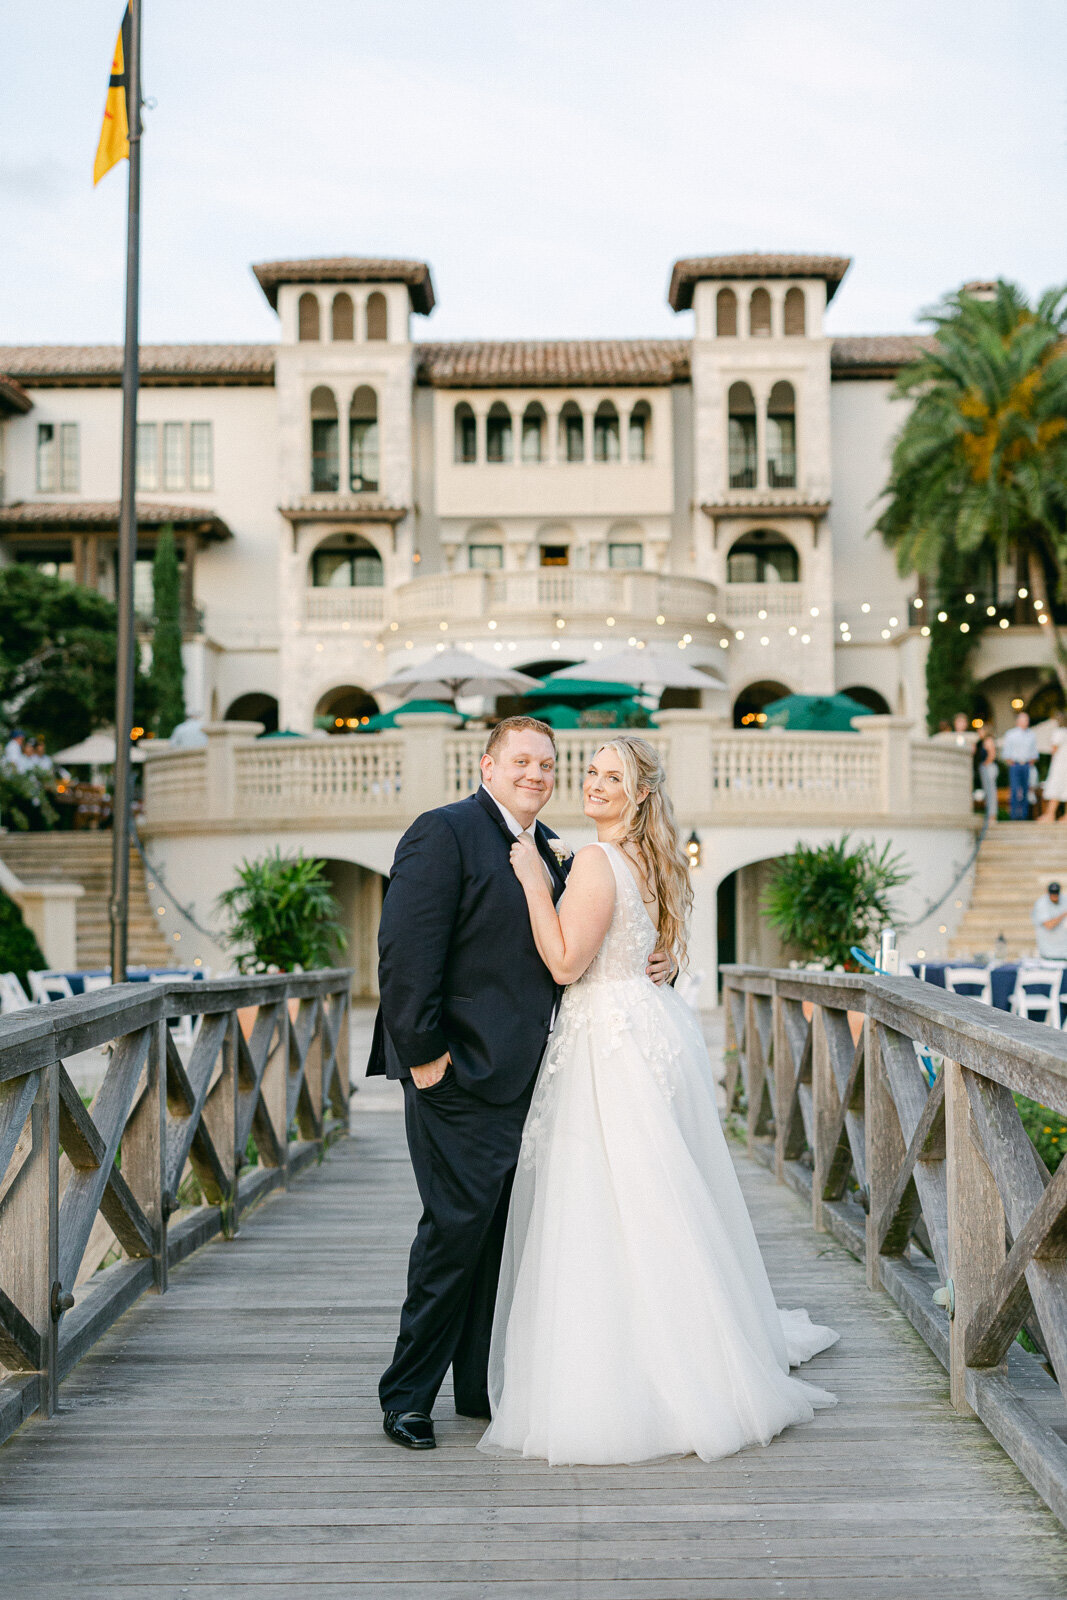 sea island wedding photography - intimate elopement - Darian Reilly Photography-71